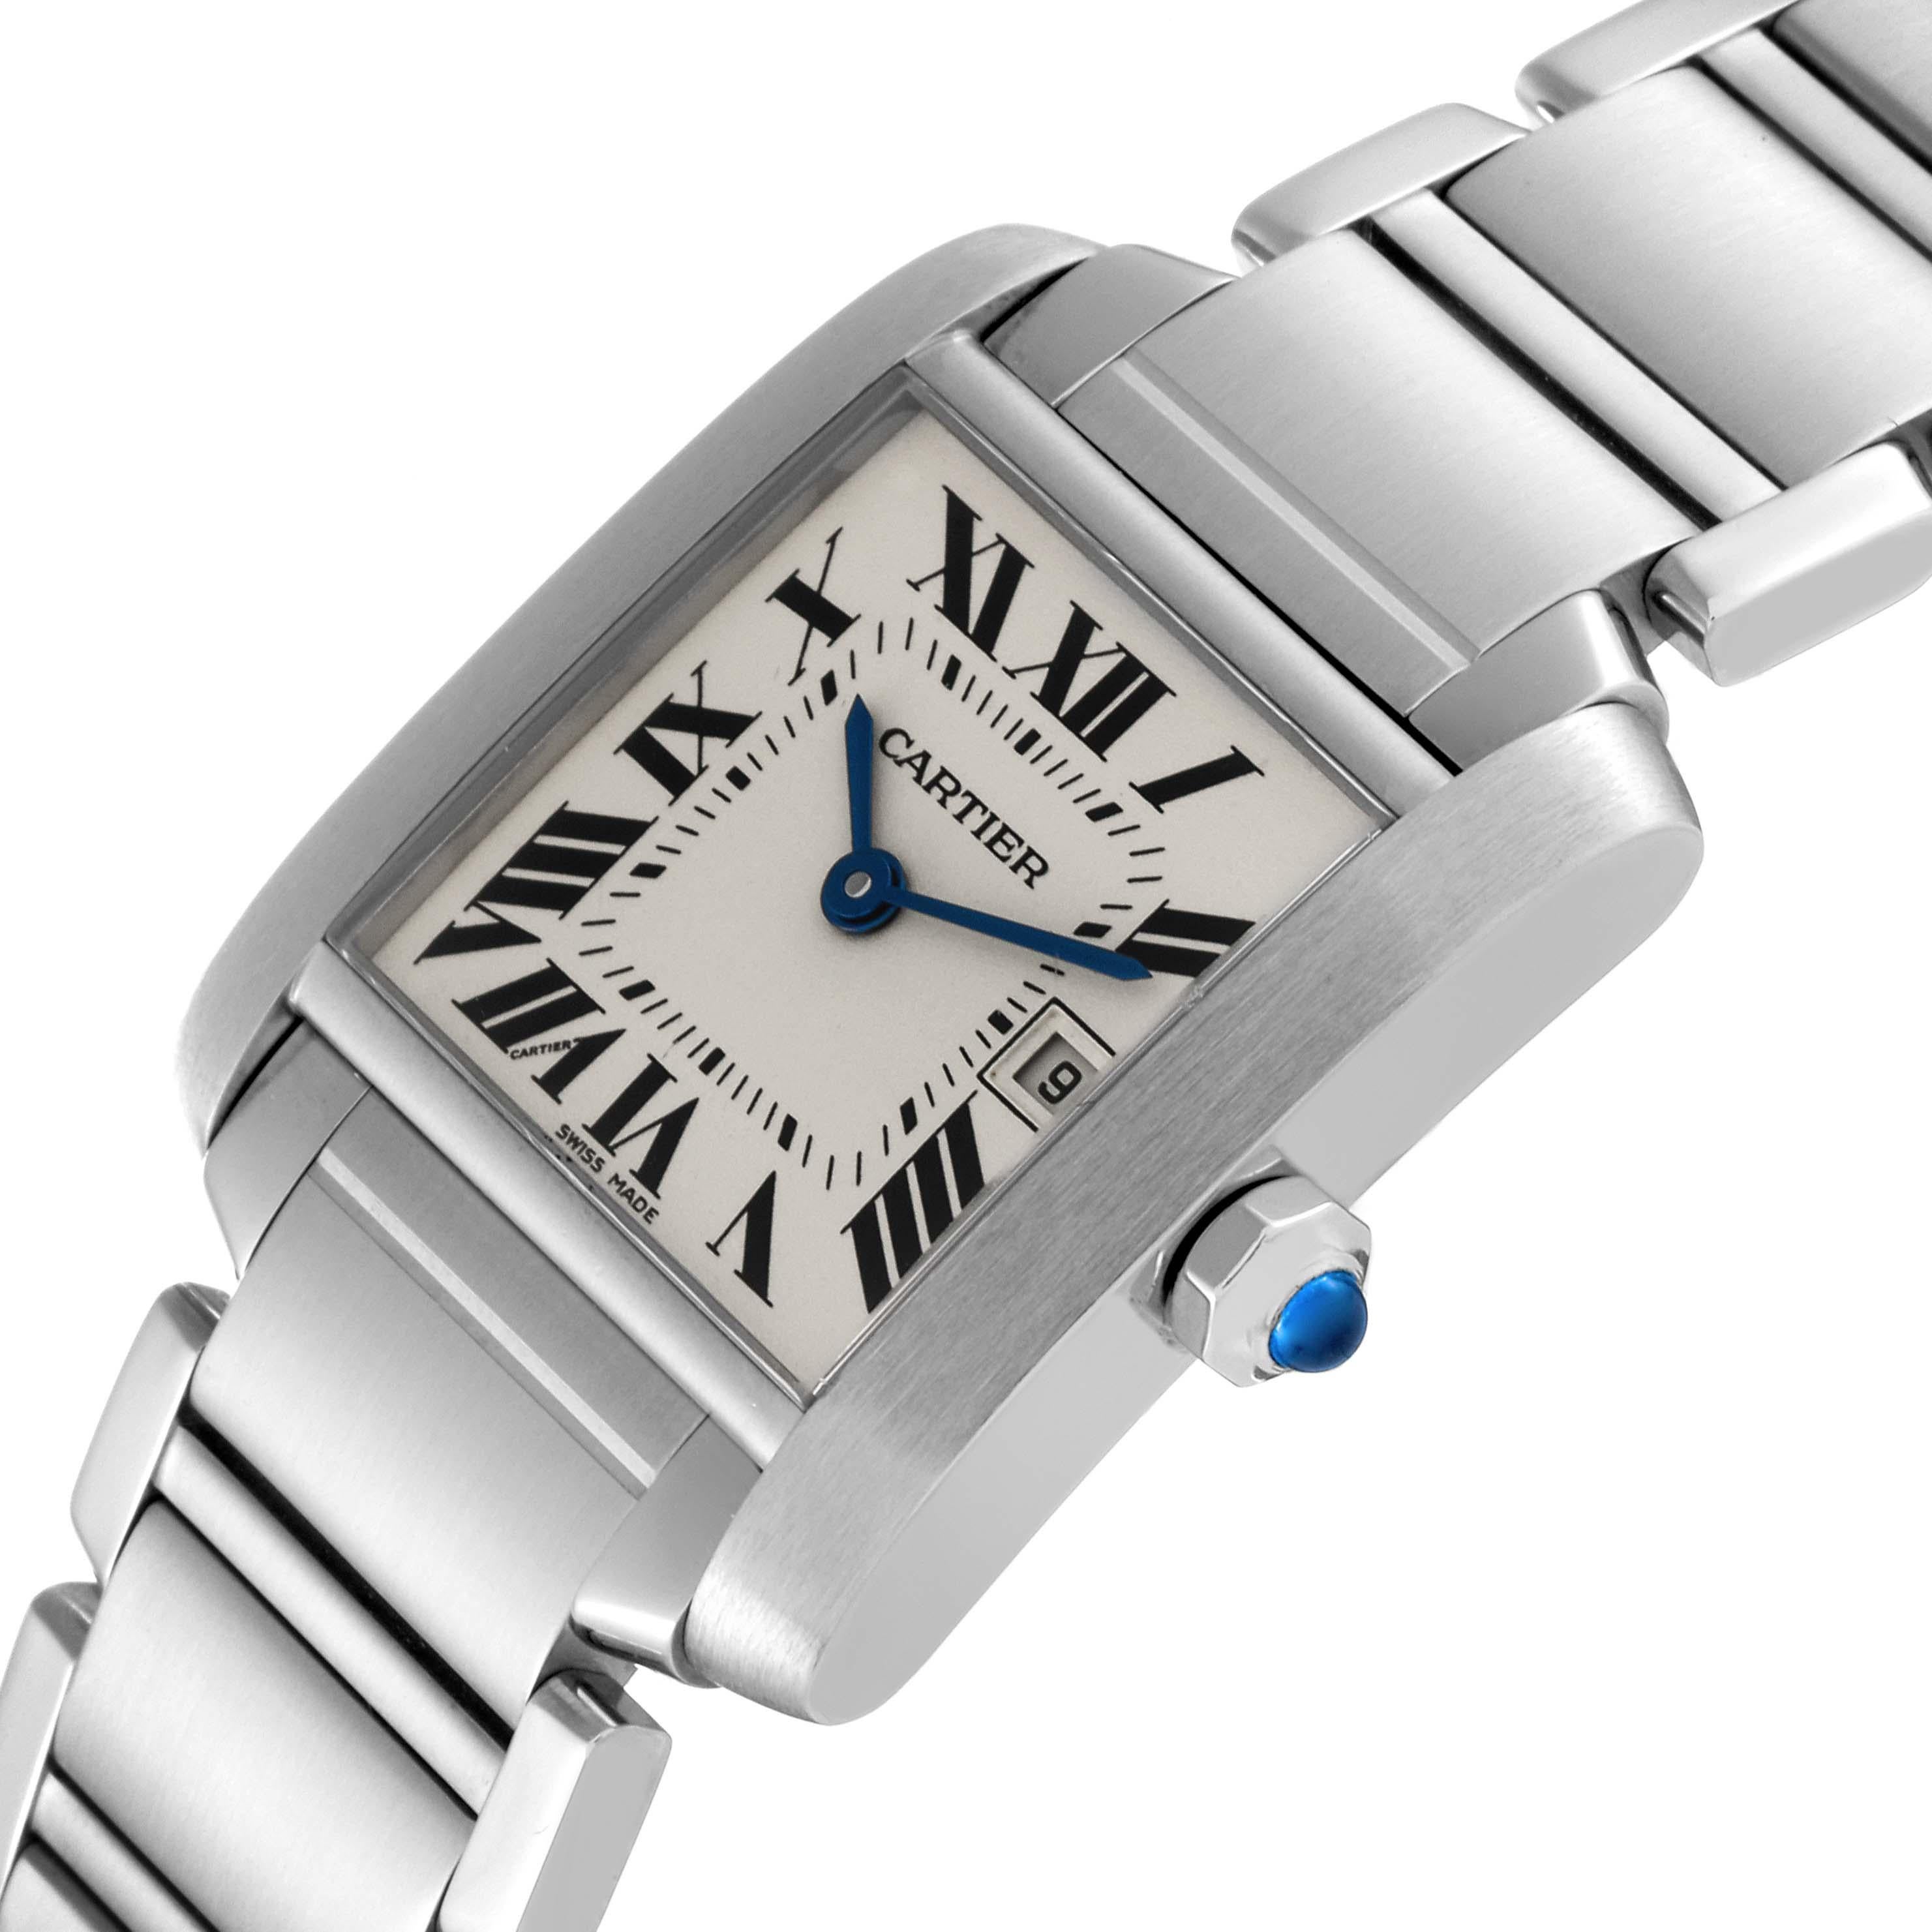 Cartier Tank Francaise Midsize Silver Dial Steel Ladies Watch W51011Q3 In Excellent Condition For Sale In Atlanta, GA